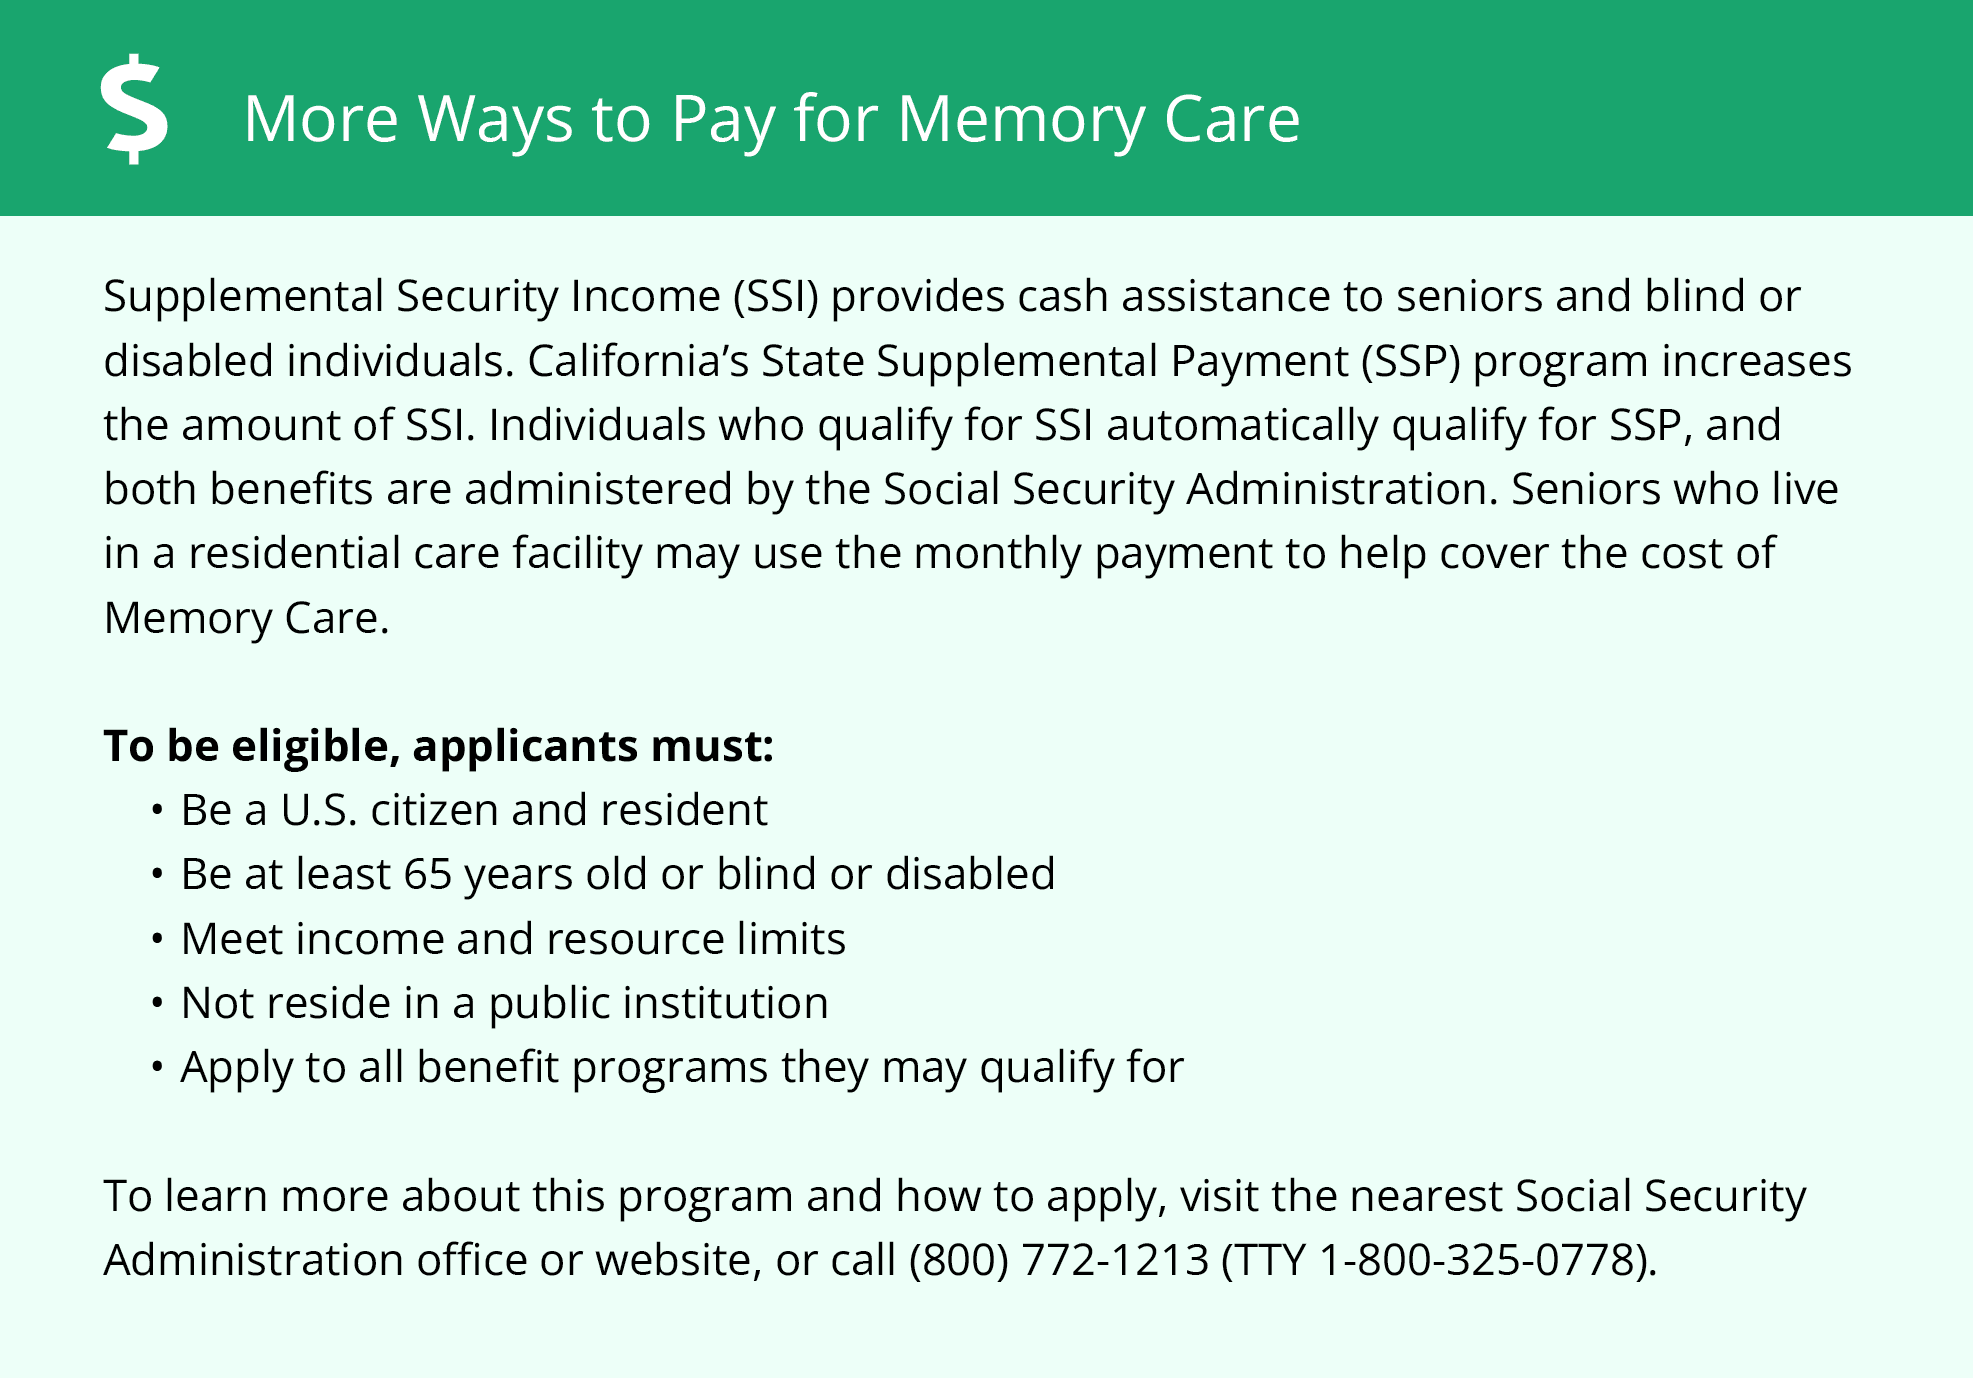 More Ways to Pay for Memory Care - California